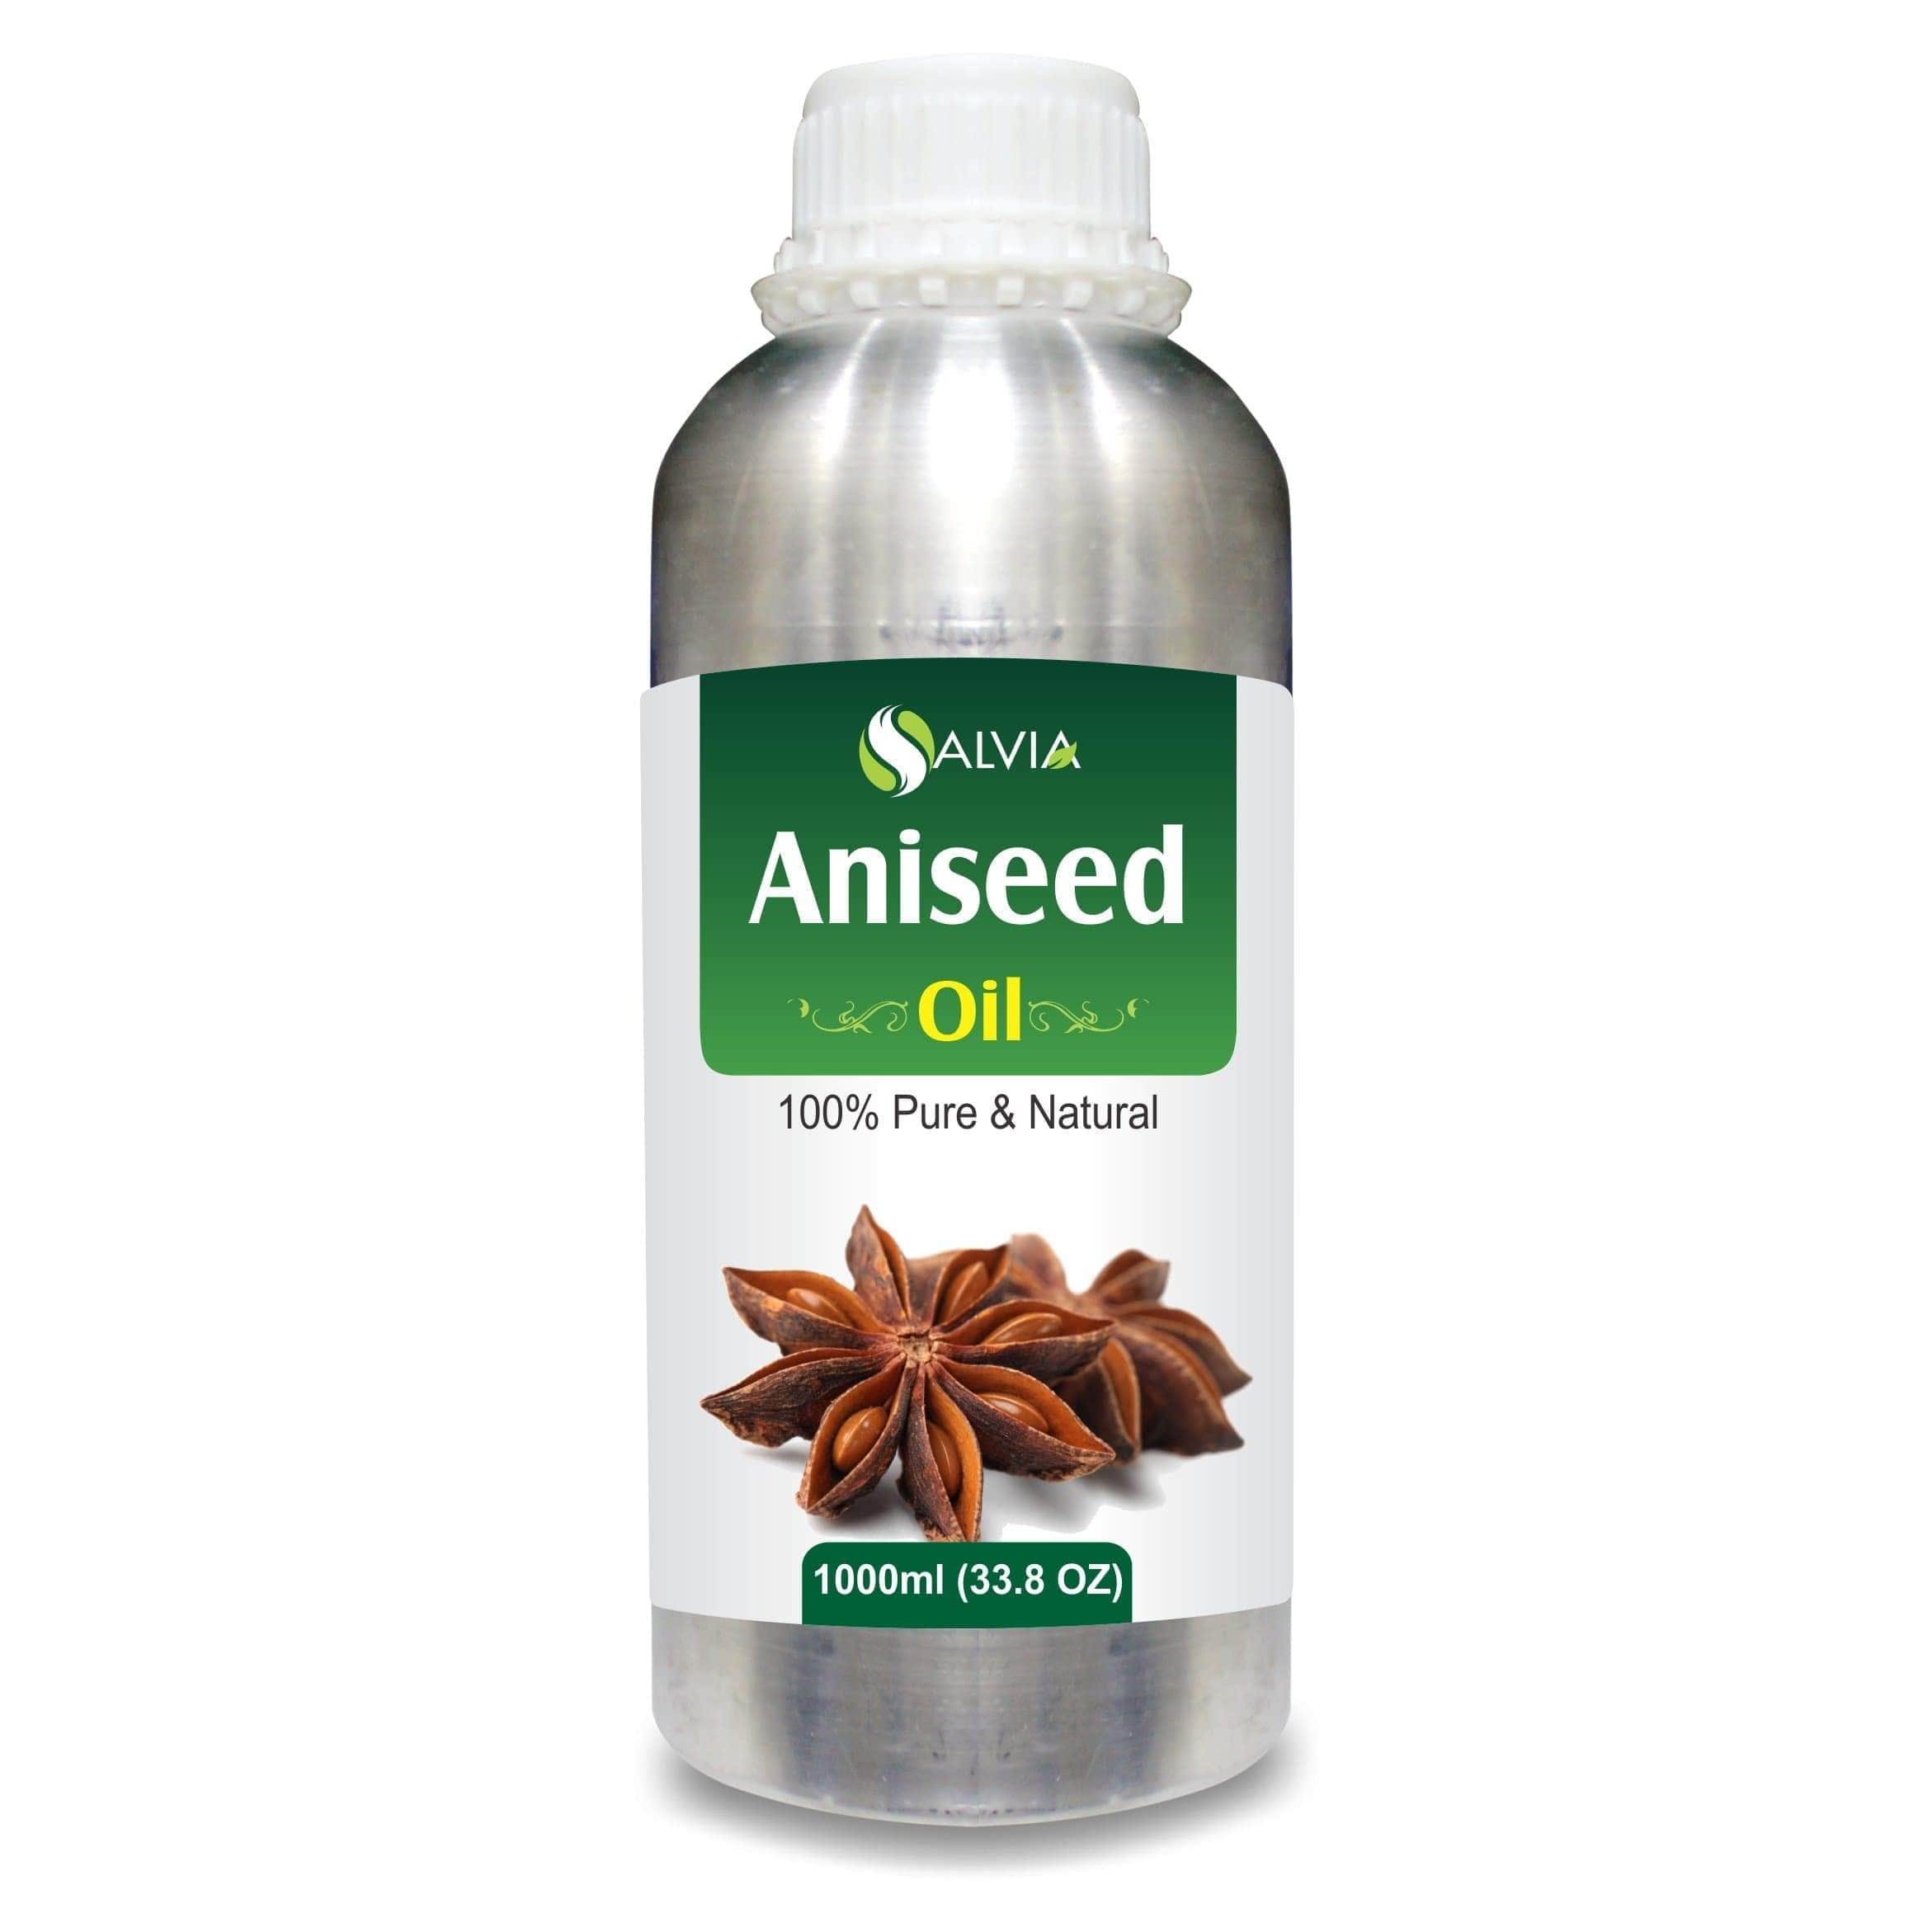 Salvia Natural Essential Oils 1000ml Aniseed Oil (Pimpinella Anisum) Natural Pure Essential Oil Undiluted Therapeutic Grade For Medicine, Inhaler Blends Help Ease Bronchitis, Colds And The Flu